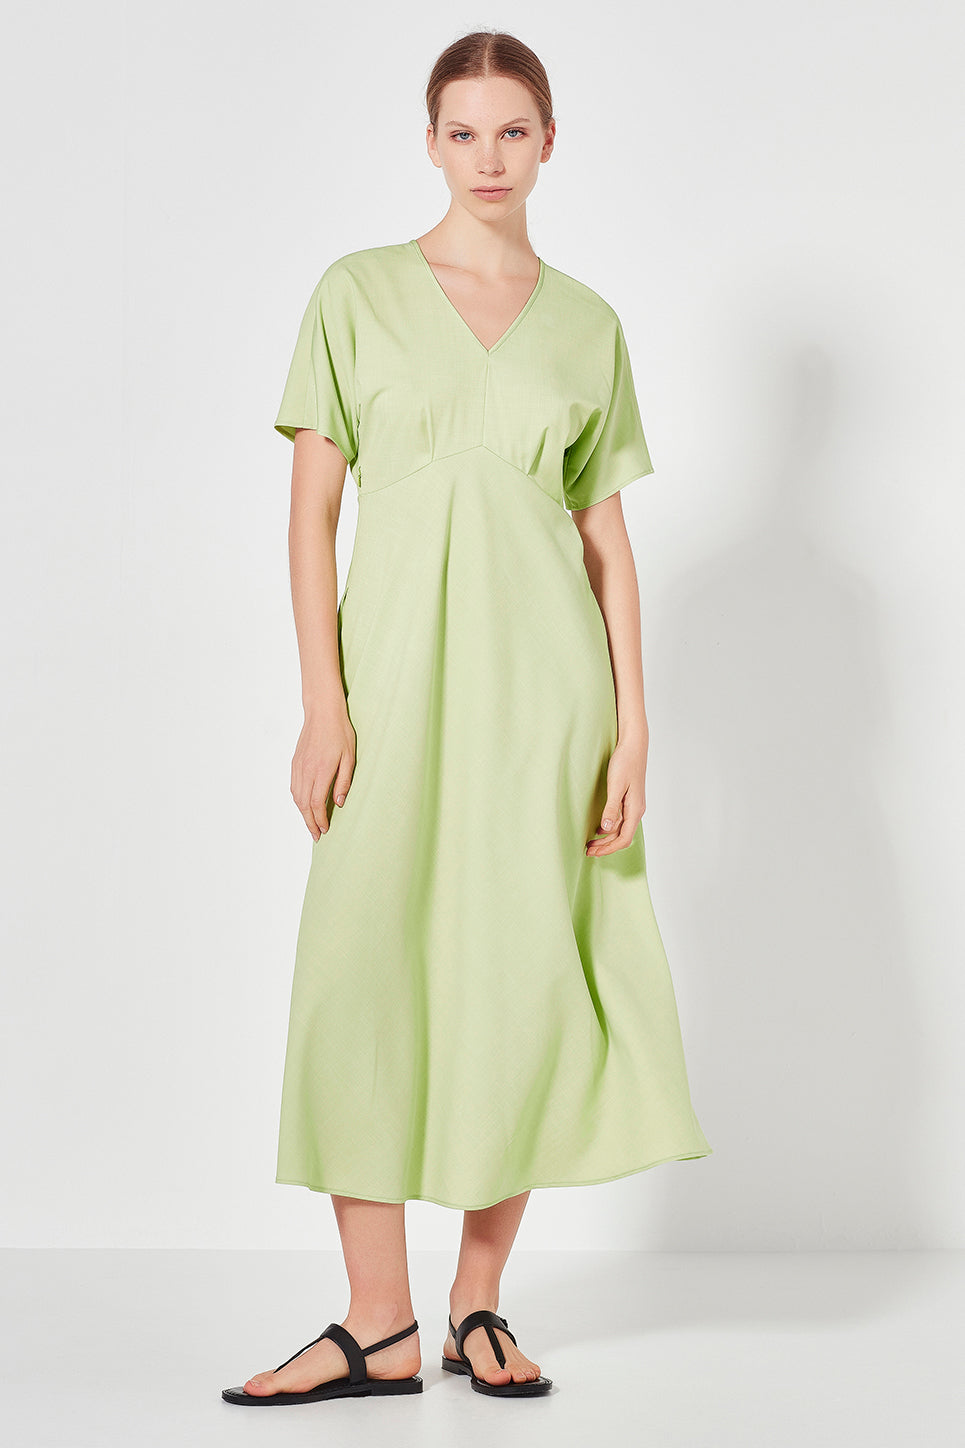 The Evelyn 2-Way Dress in Apple